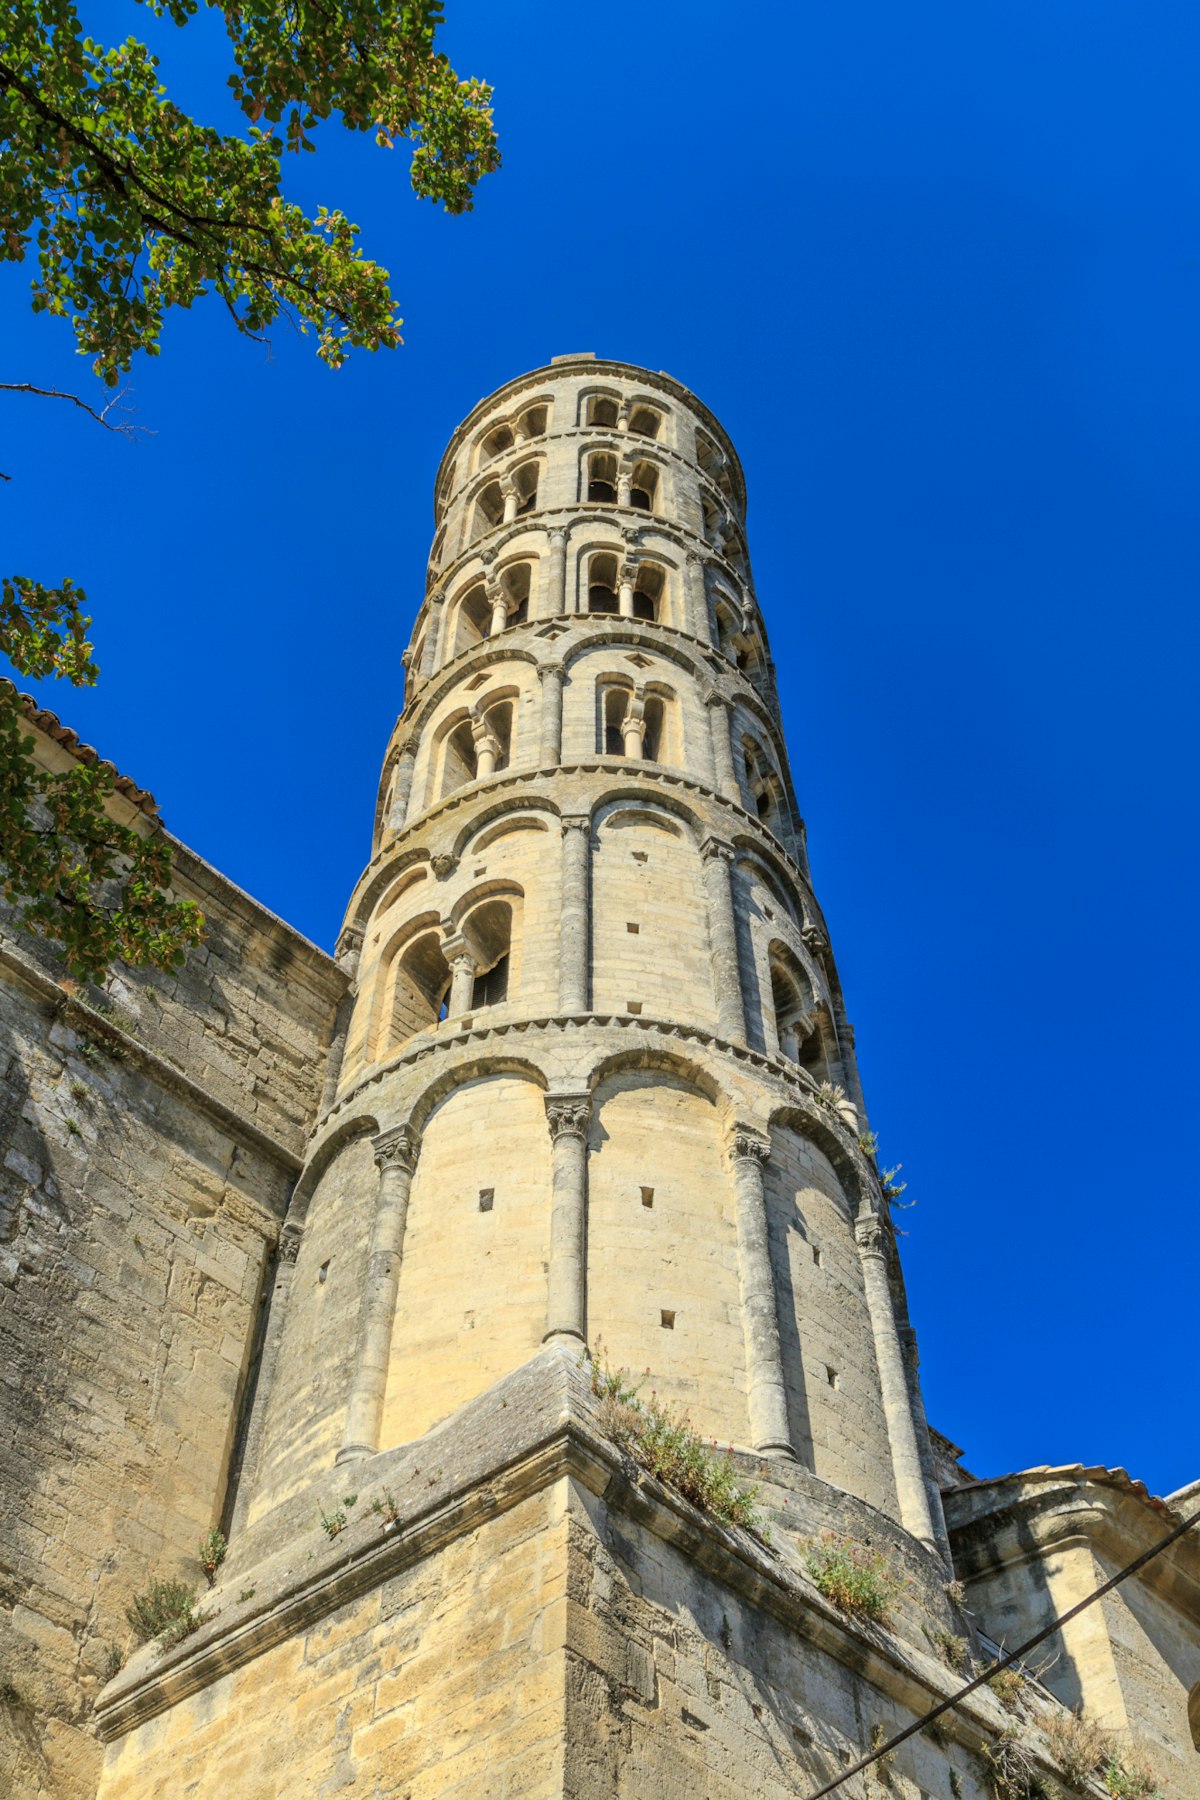 Uzes, Fenestrelle Tower, Cathedral of St. Theodore, Languedoc Roussillon, France; Shutterstock ID 119161549; Your name (First / Last): Daniel Fahey; GL account no.: 65050; Netsuite department name: Online Editorial; Full Product or Project name including edition: Cathédrale St-Théodont POI